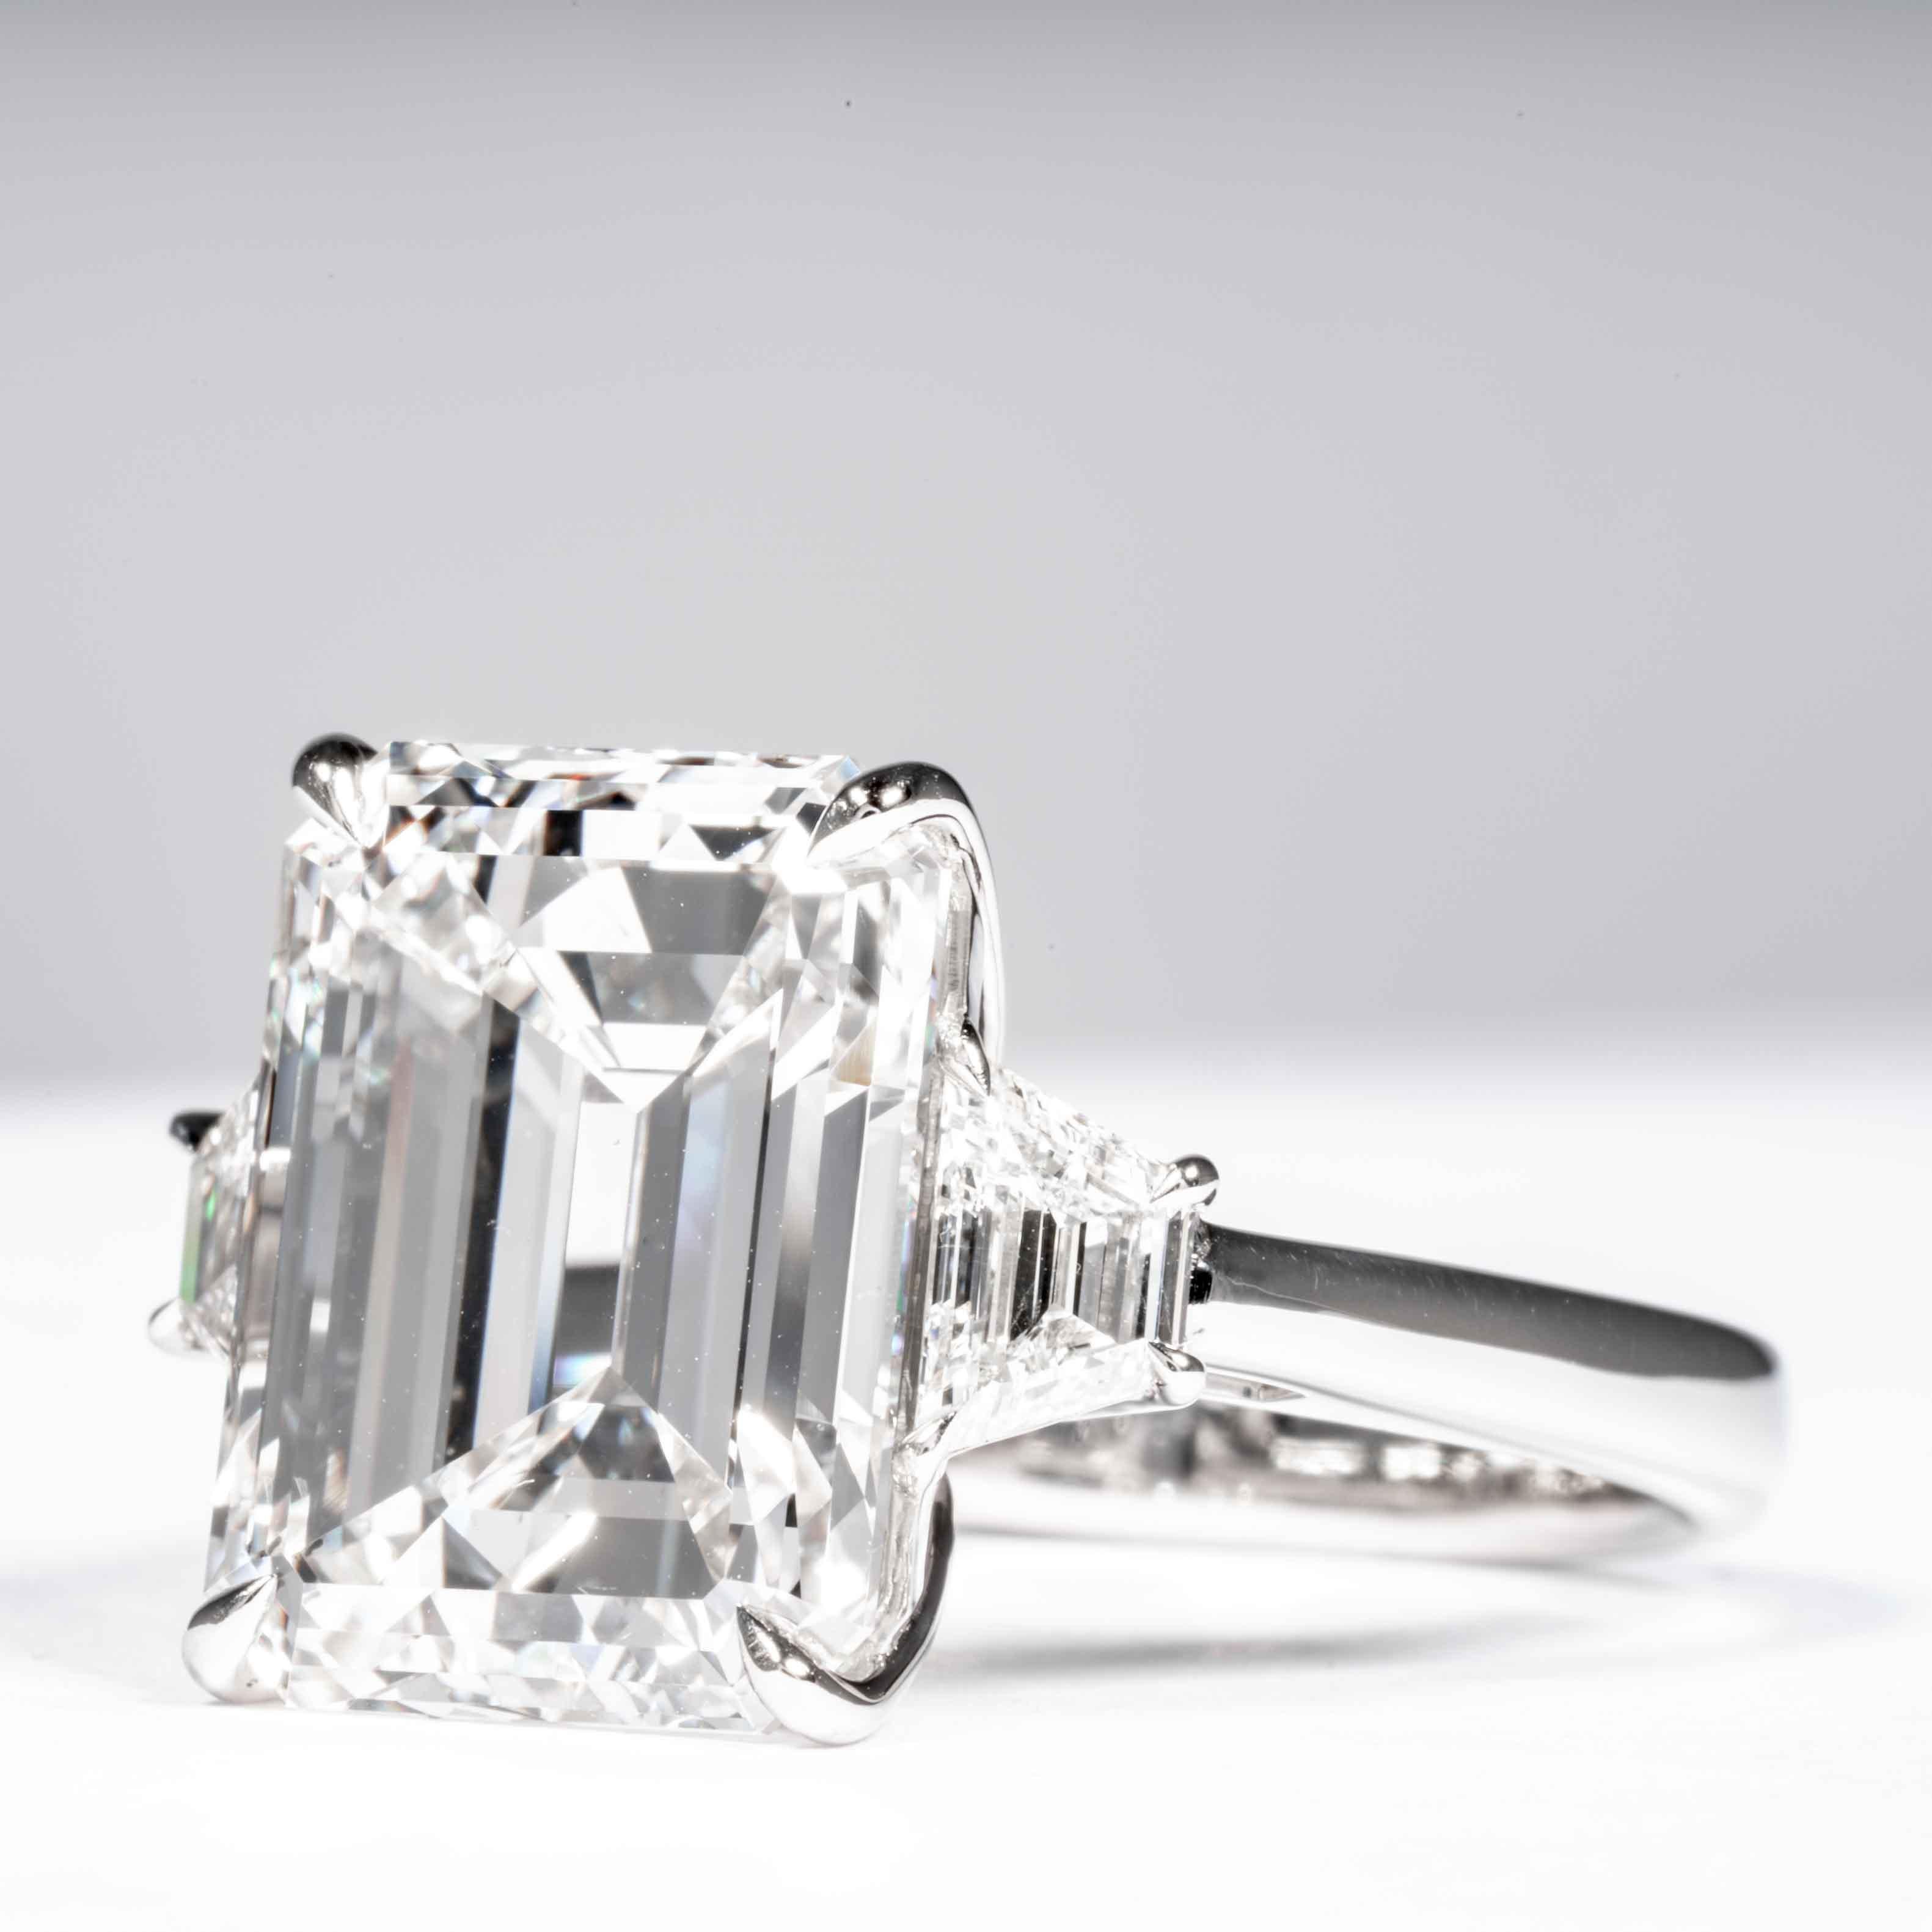 Shreve, Crump & Low GIA Certified 8.97 Carat G VS2 Emerald Cut Diamond Ring In New Condition For Sale In Boston, MA